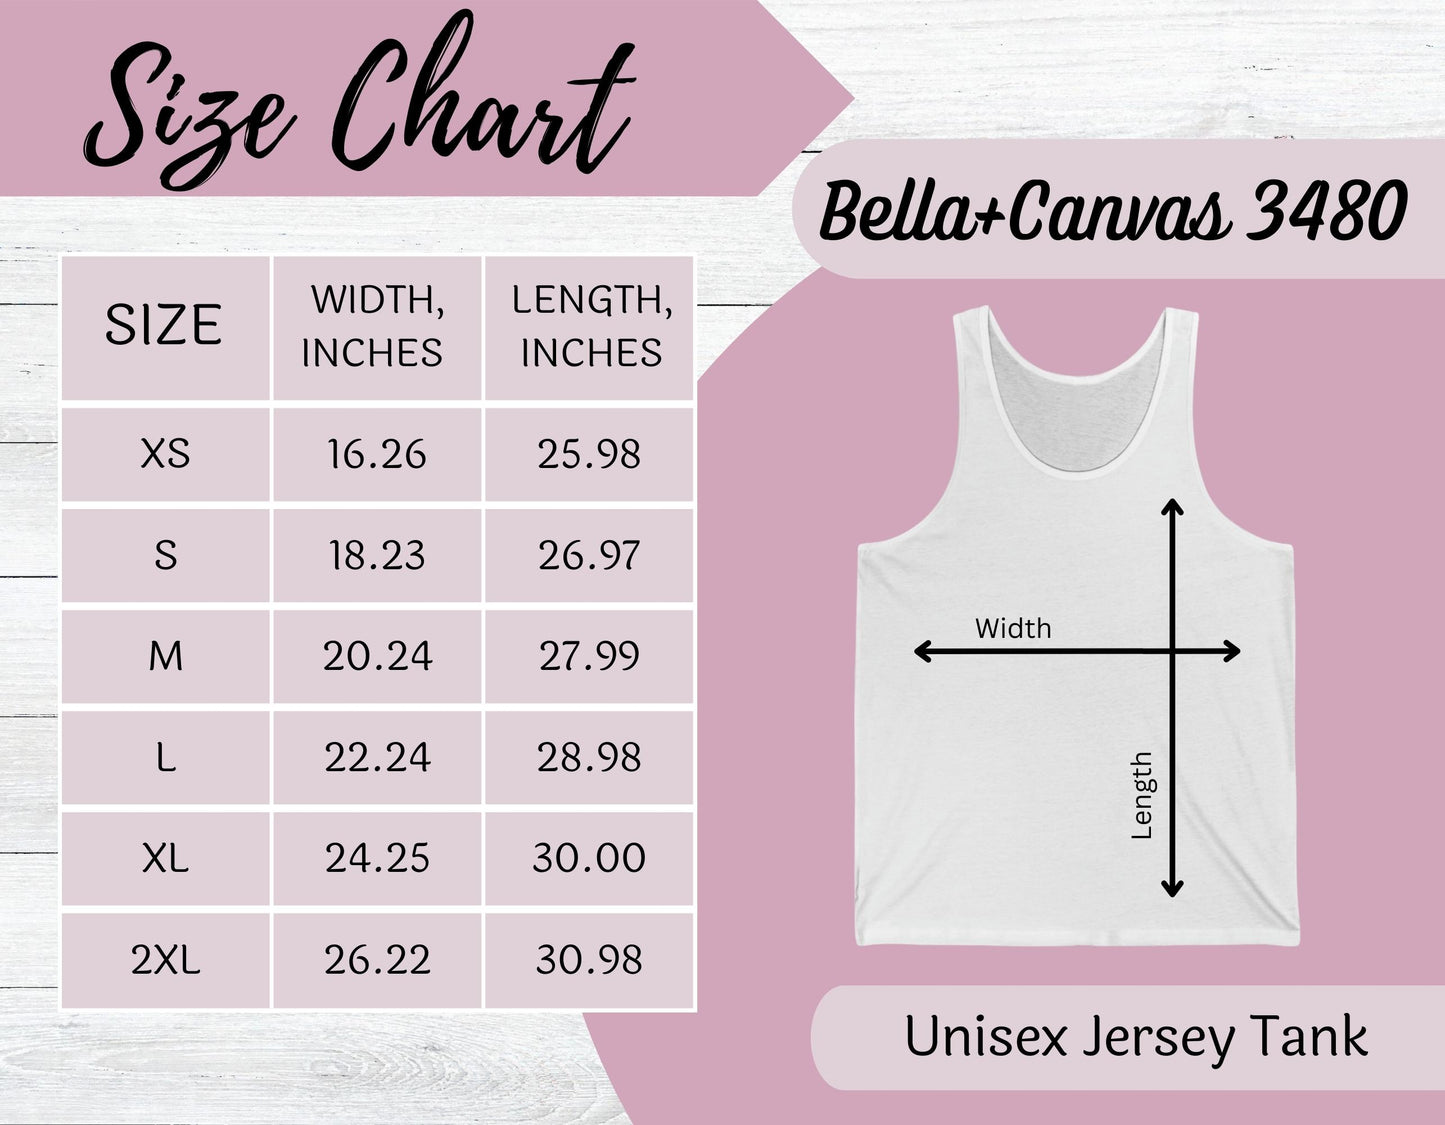 This Night is Sparkling DL Tank Top | Adult Bella+Canvas Unisex